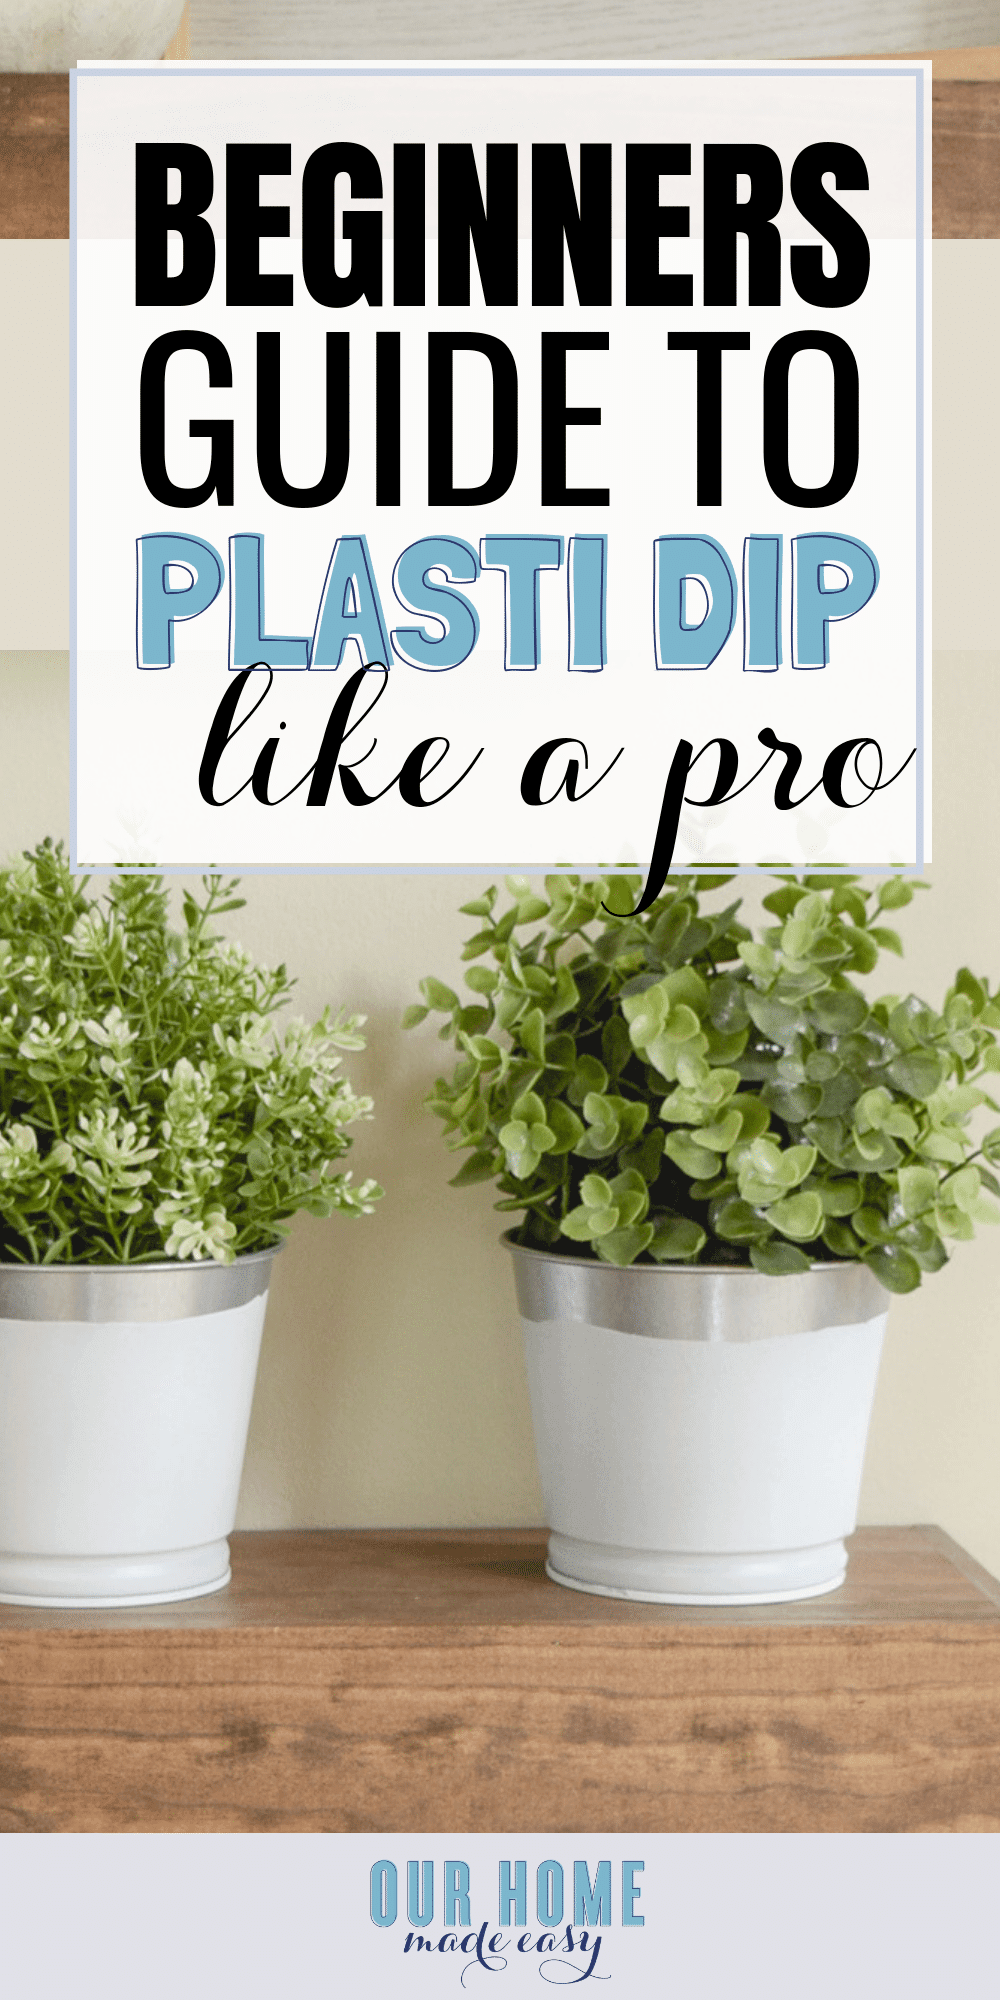 Create fun crafts with the creative dipped-paint look without all the mess! Here's how to use Plasti Dip crafting spray paint like a pro for great crafts #sponsored #crafts #diycraft #paint #farmhouse #plastidip